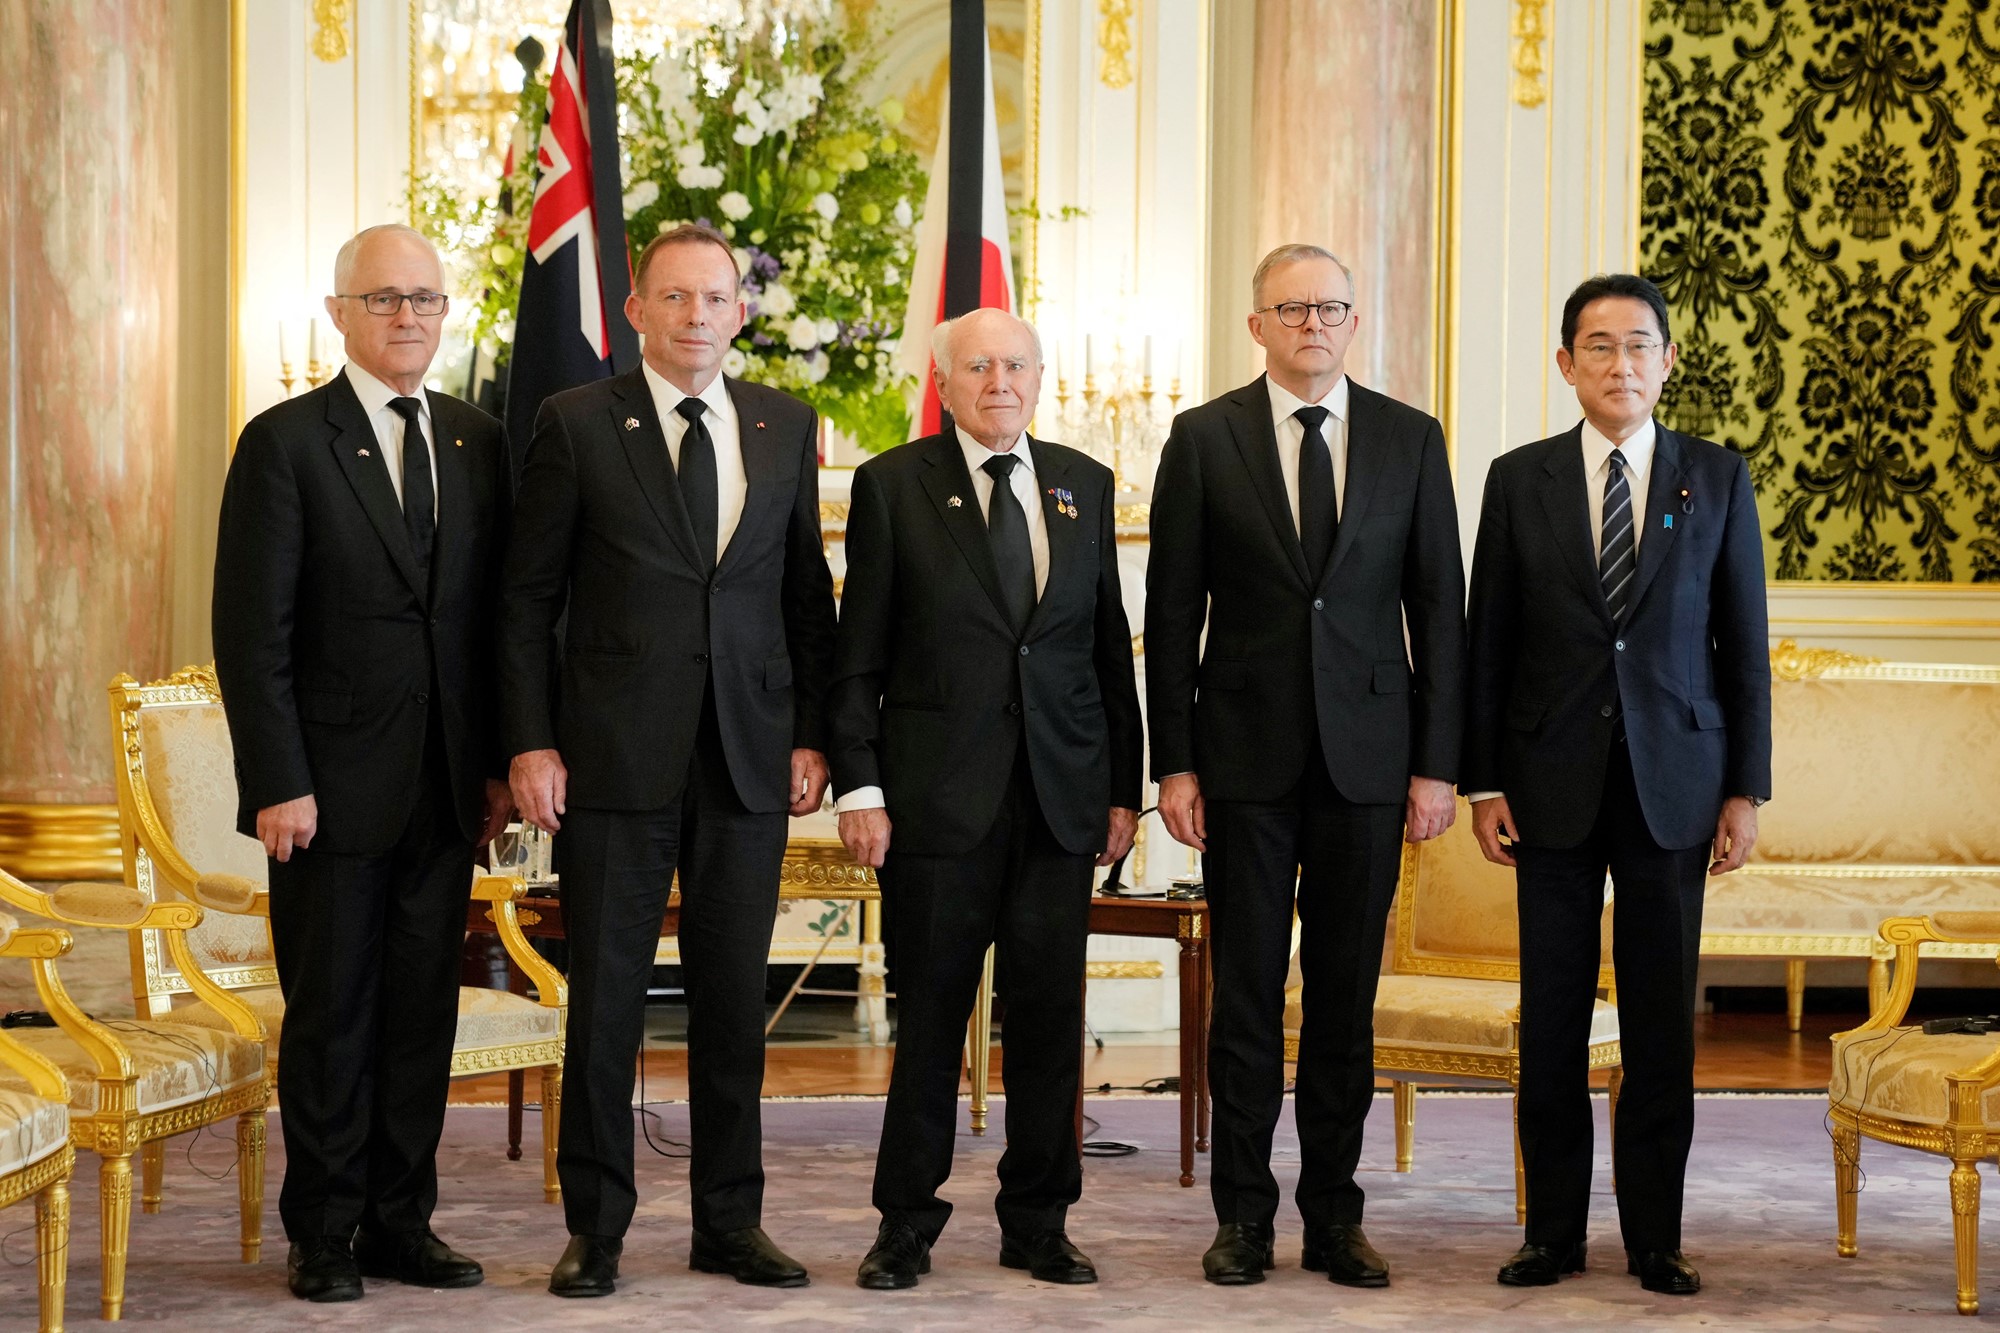  Malcolm Turnbull, from left, Tony Abbott, John Howard and current Prime Minister Anthony Albanese pose for a photo with Japanese Prime Minister Fumio Kishida